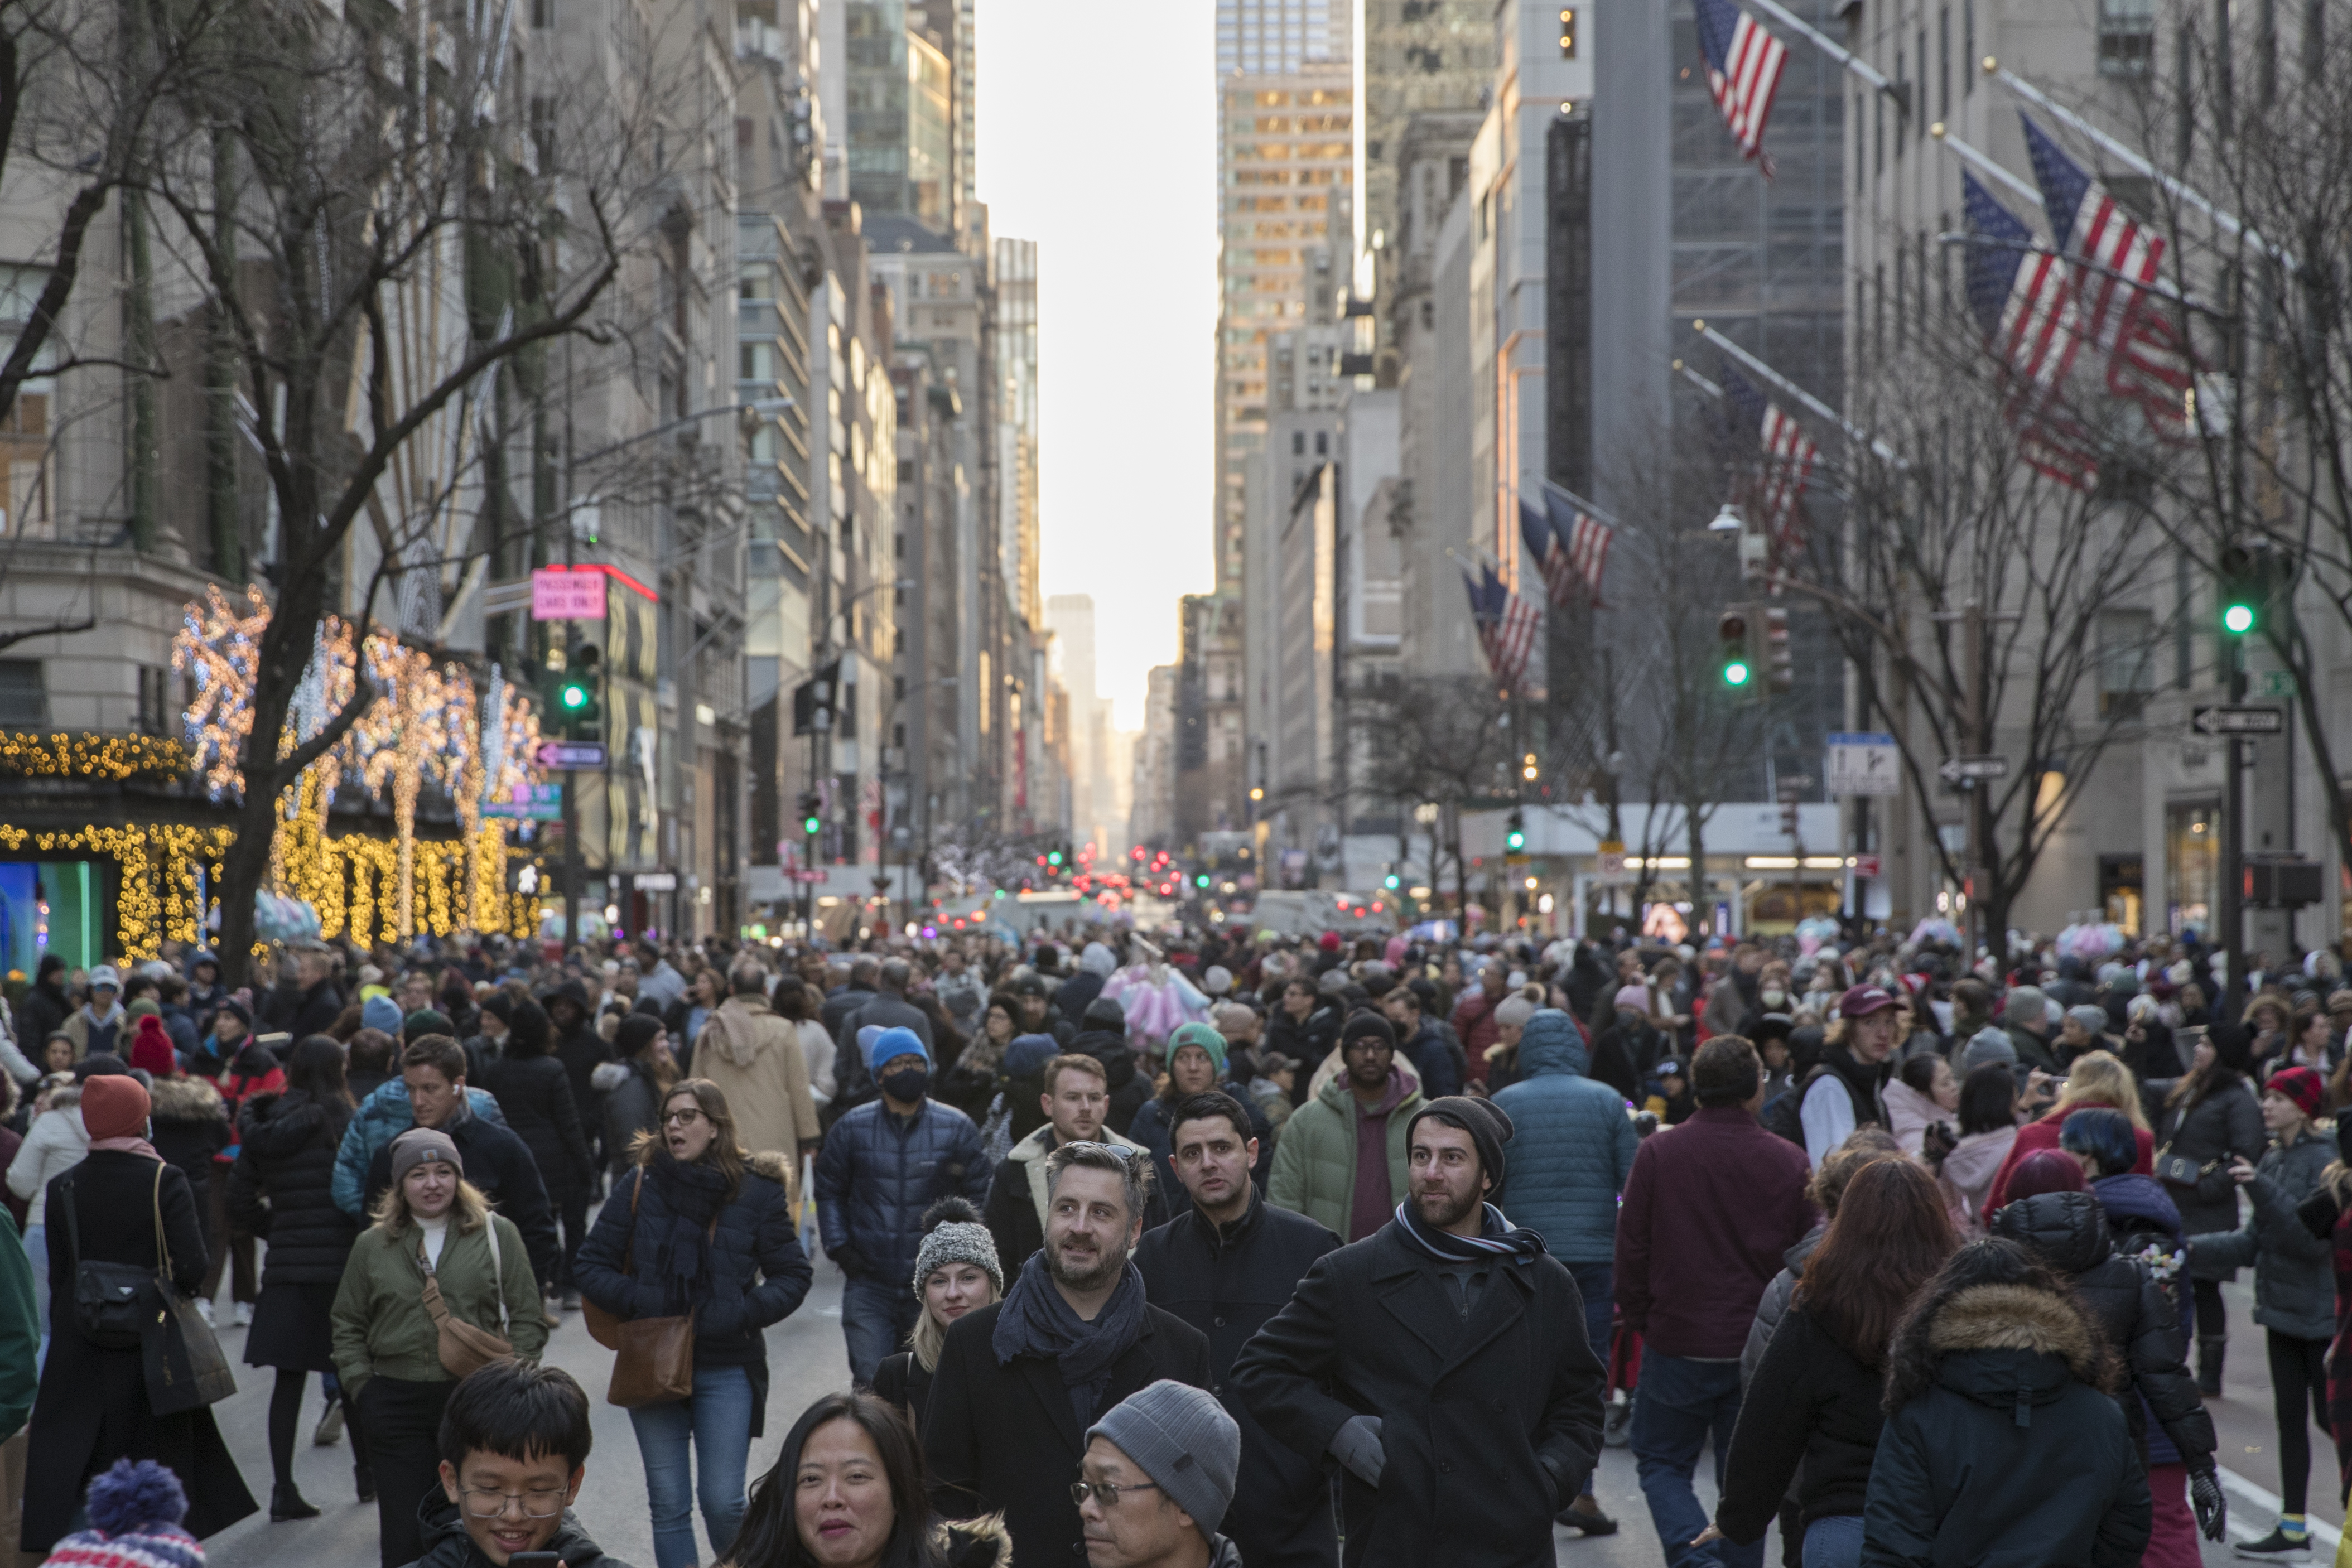 NYC to turn Fifth Avenue into Open Street for holidays